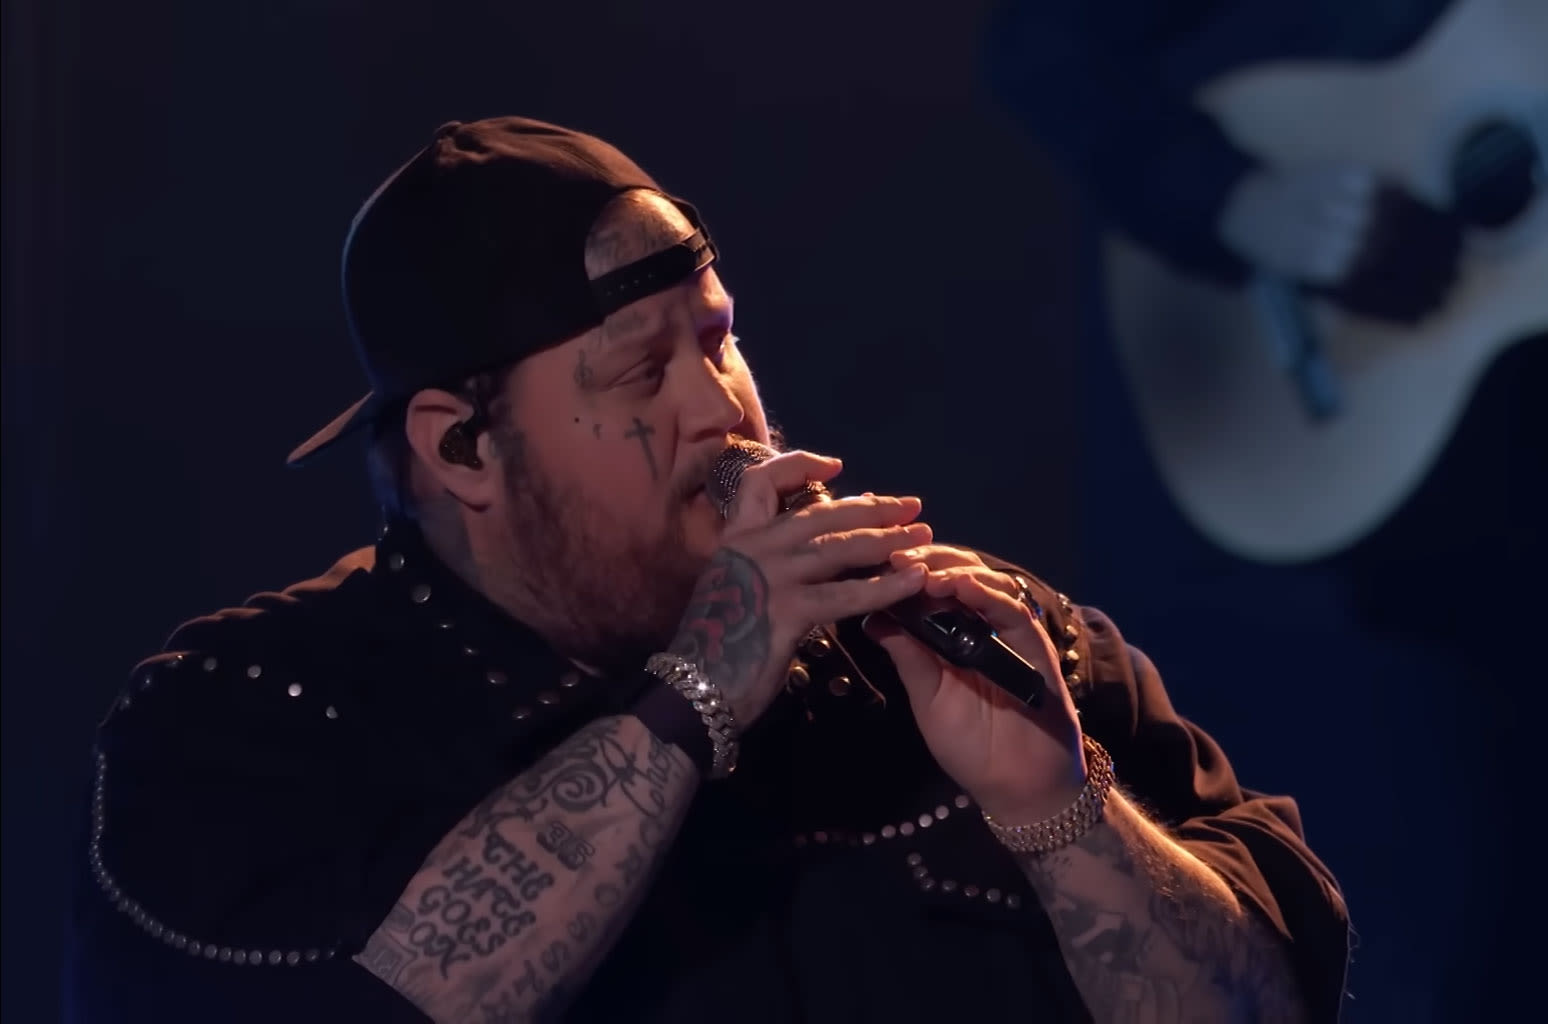 Watch Jelly Roll Debut Vulnerable New Song ‘I Am Not OK’ on ‘The Voice’ Finale